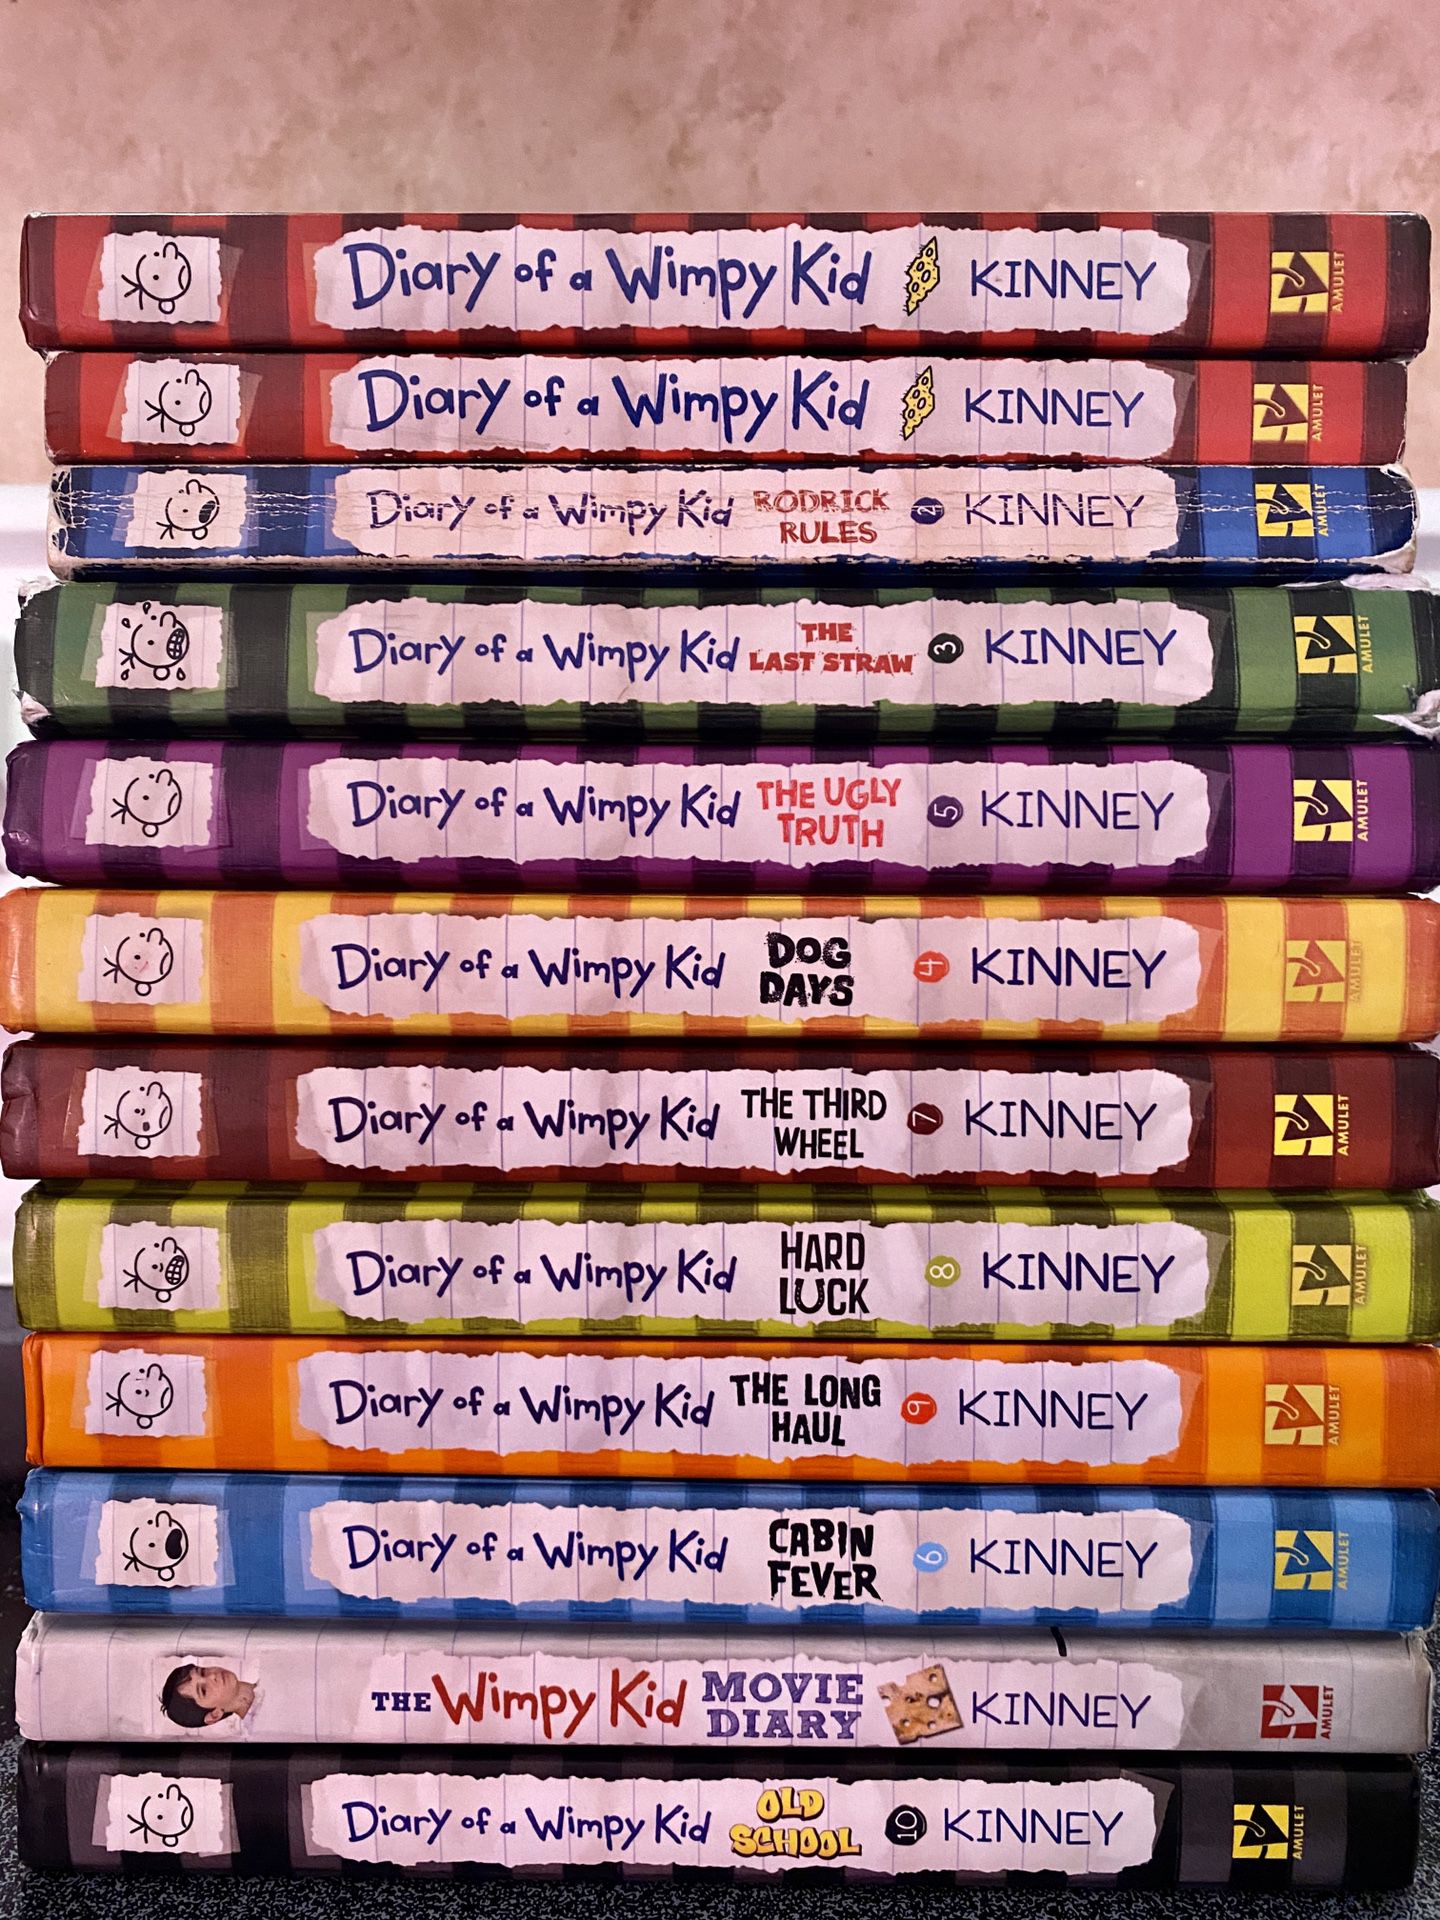 12 Diary of a Whimpy Kid Books